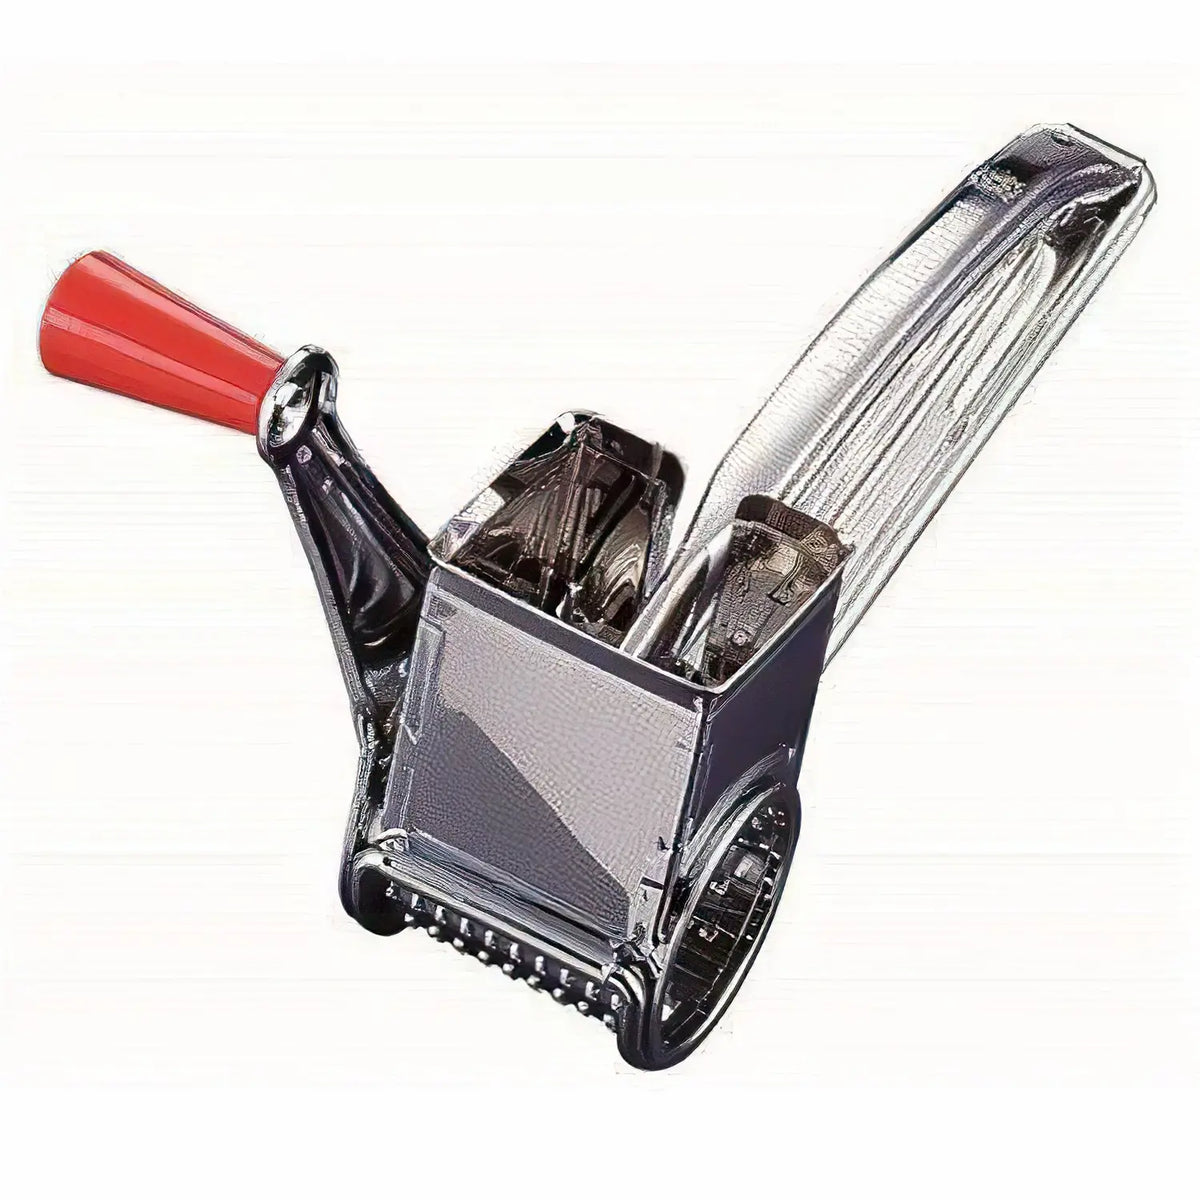 Stainless Steel Rotary Cheese Grater - Brilliant Promos - Be